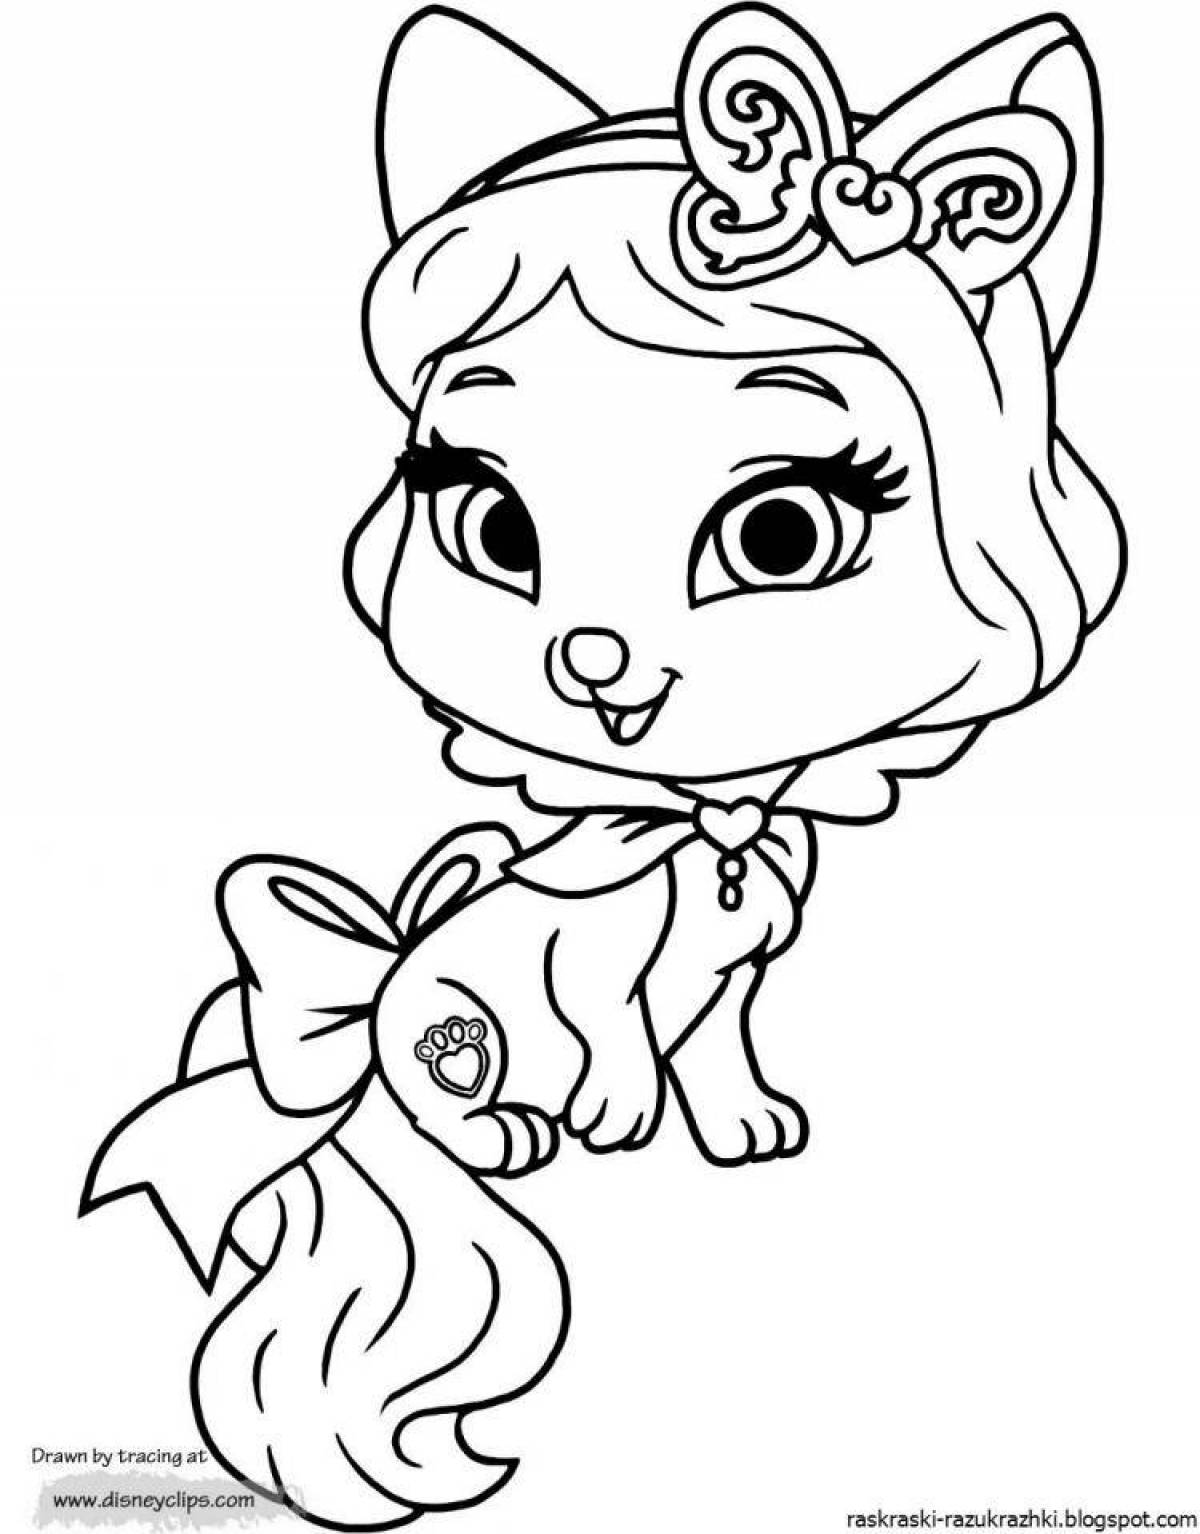 Colorful kitten with a bow coloring book